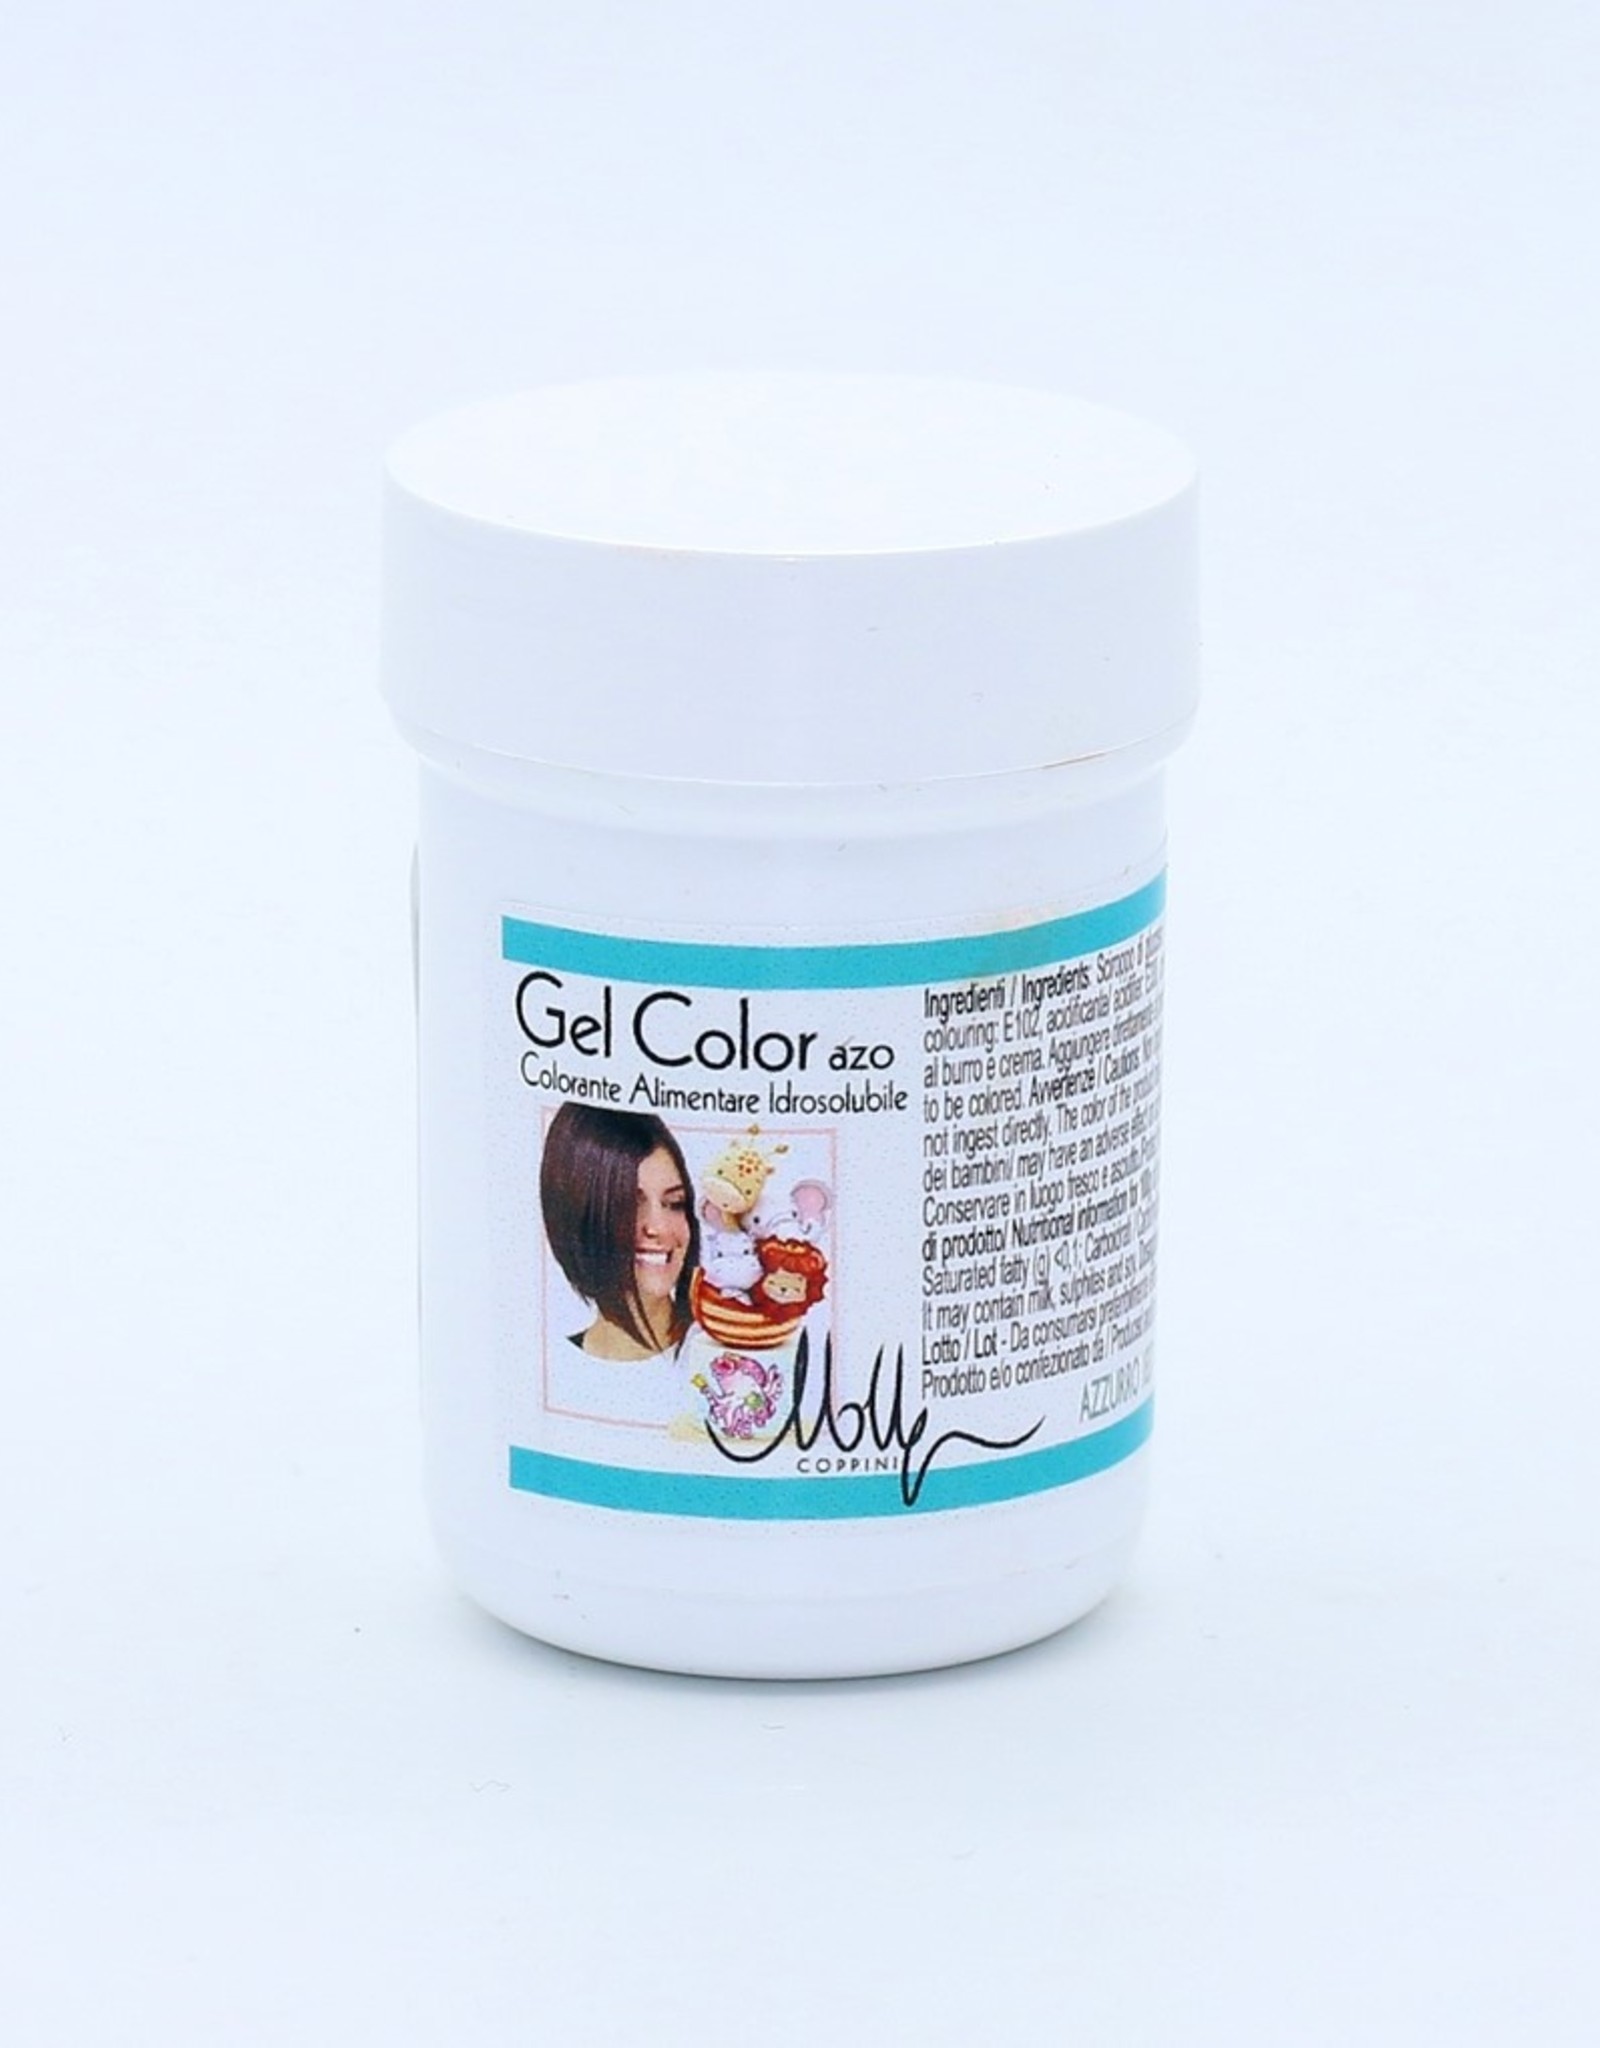 Molly Coppini Molly Coppini Gel Color Sky Blue/Turquoise 30g